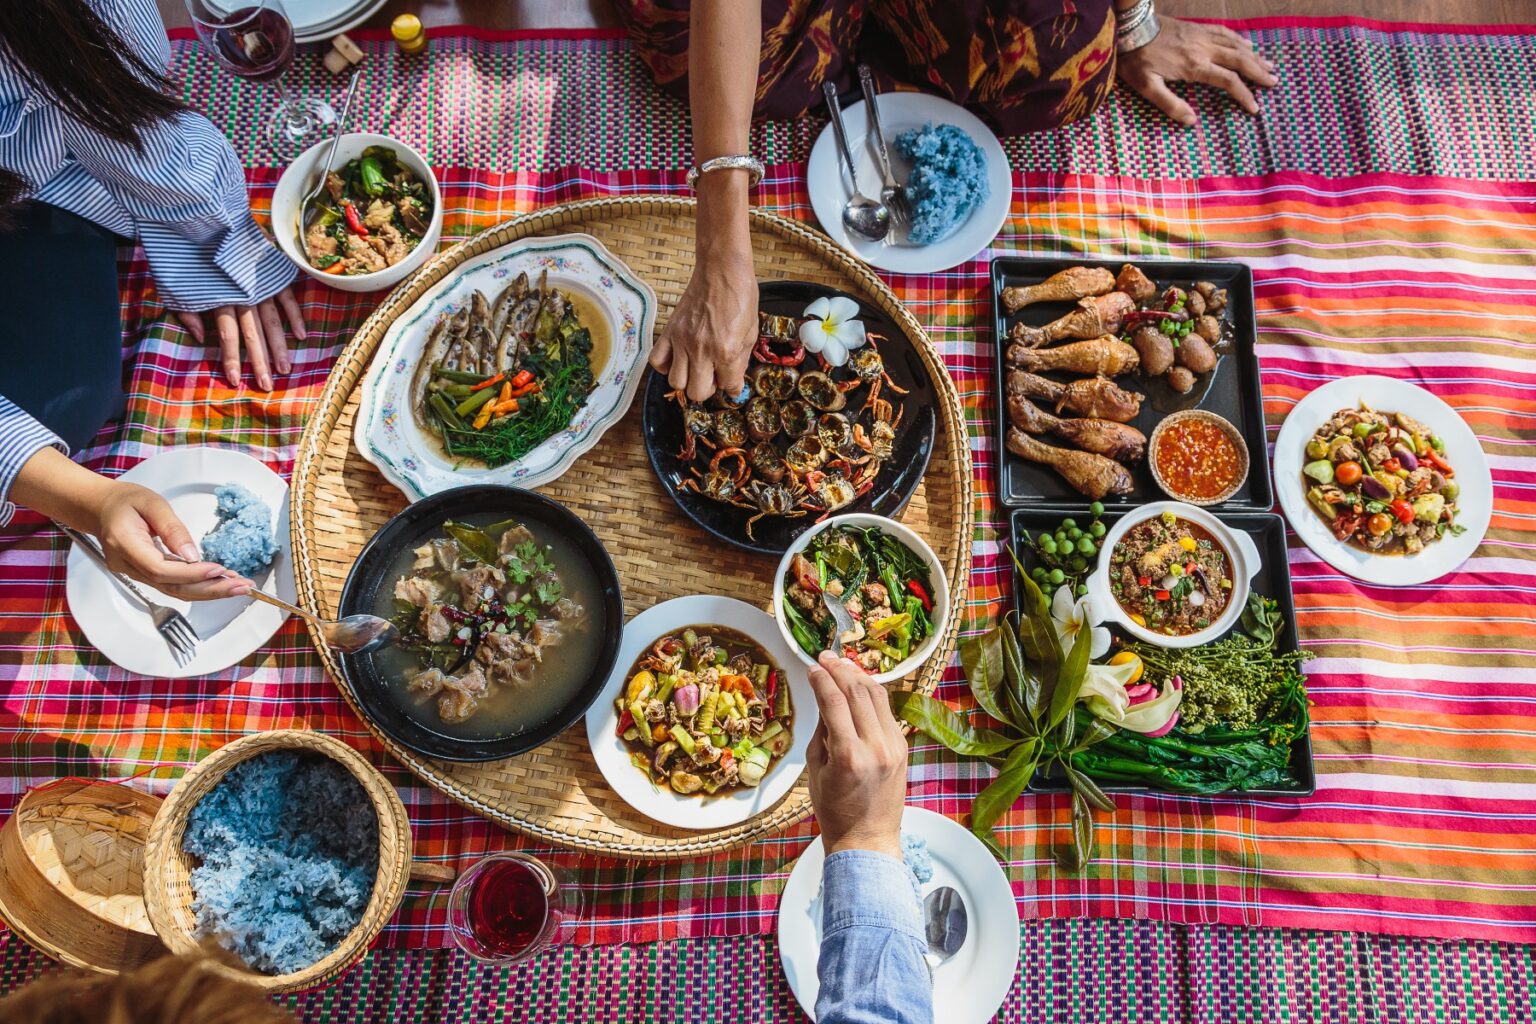 A spread of various Thai dishes on a mat, with various hands reaching out to serve the food